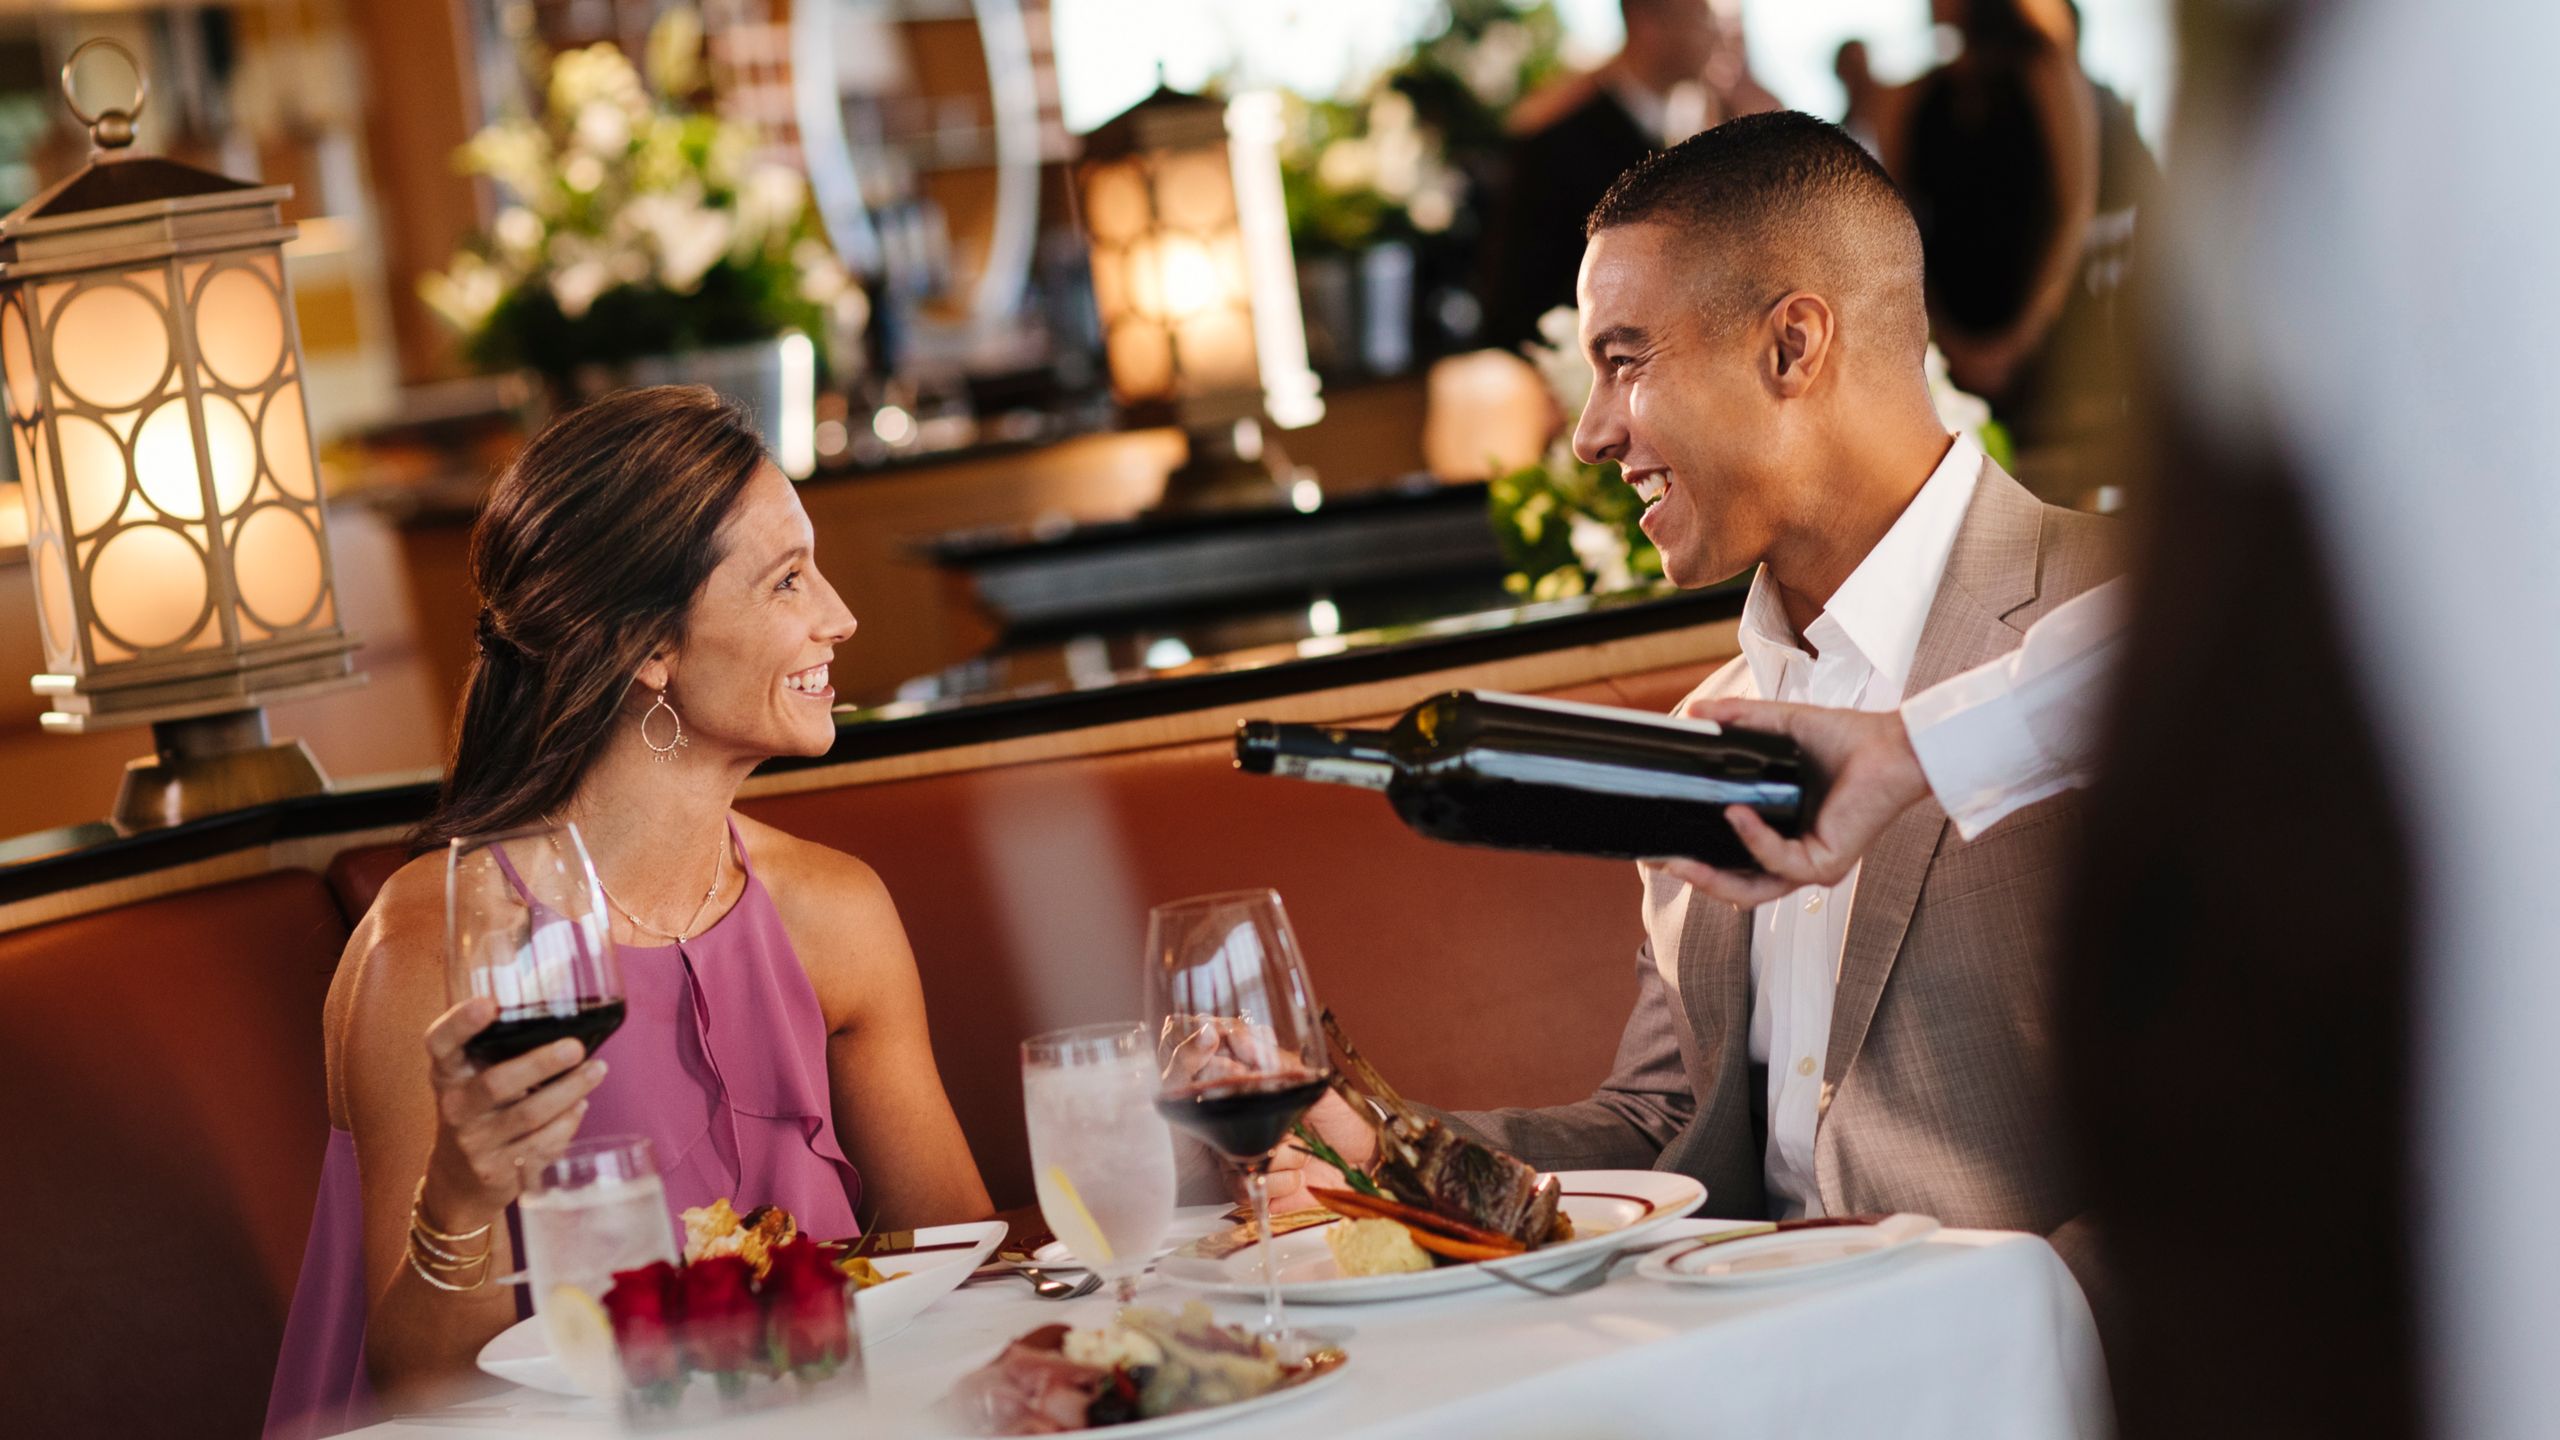 A couple smiling at each other while being served wine